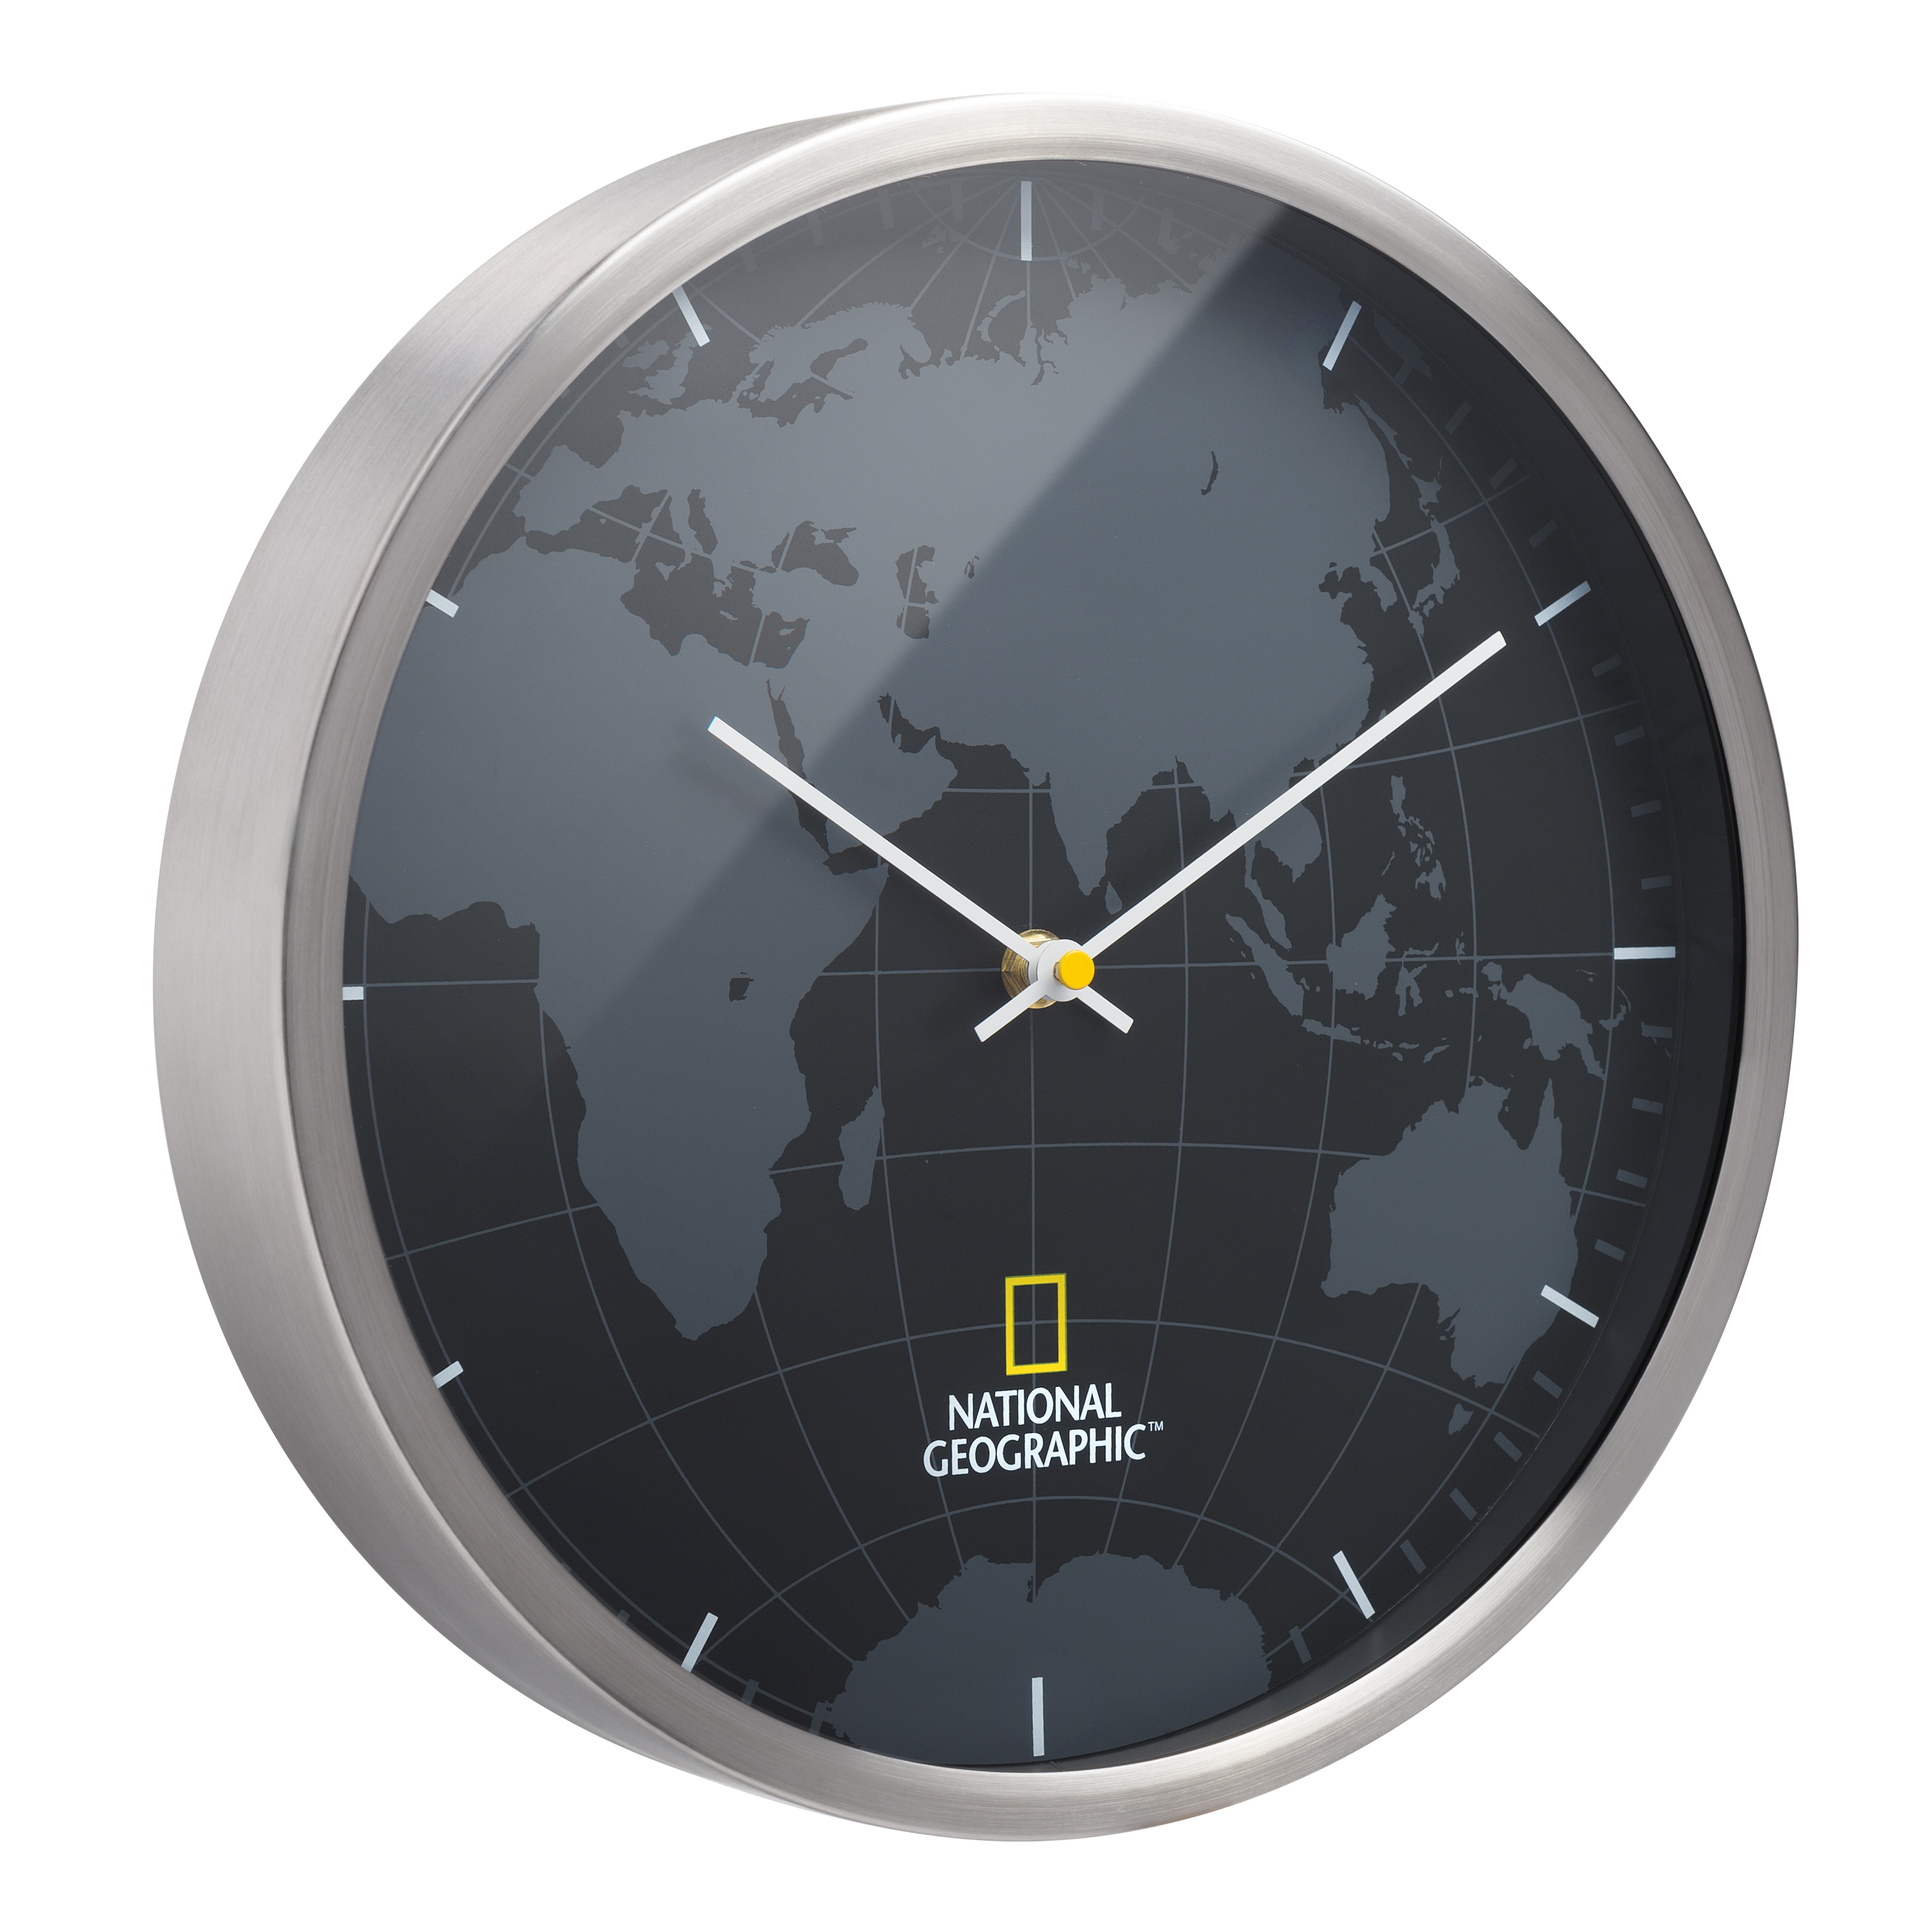 NATIONAL GEOGRAPHIC 30 cm Clock